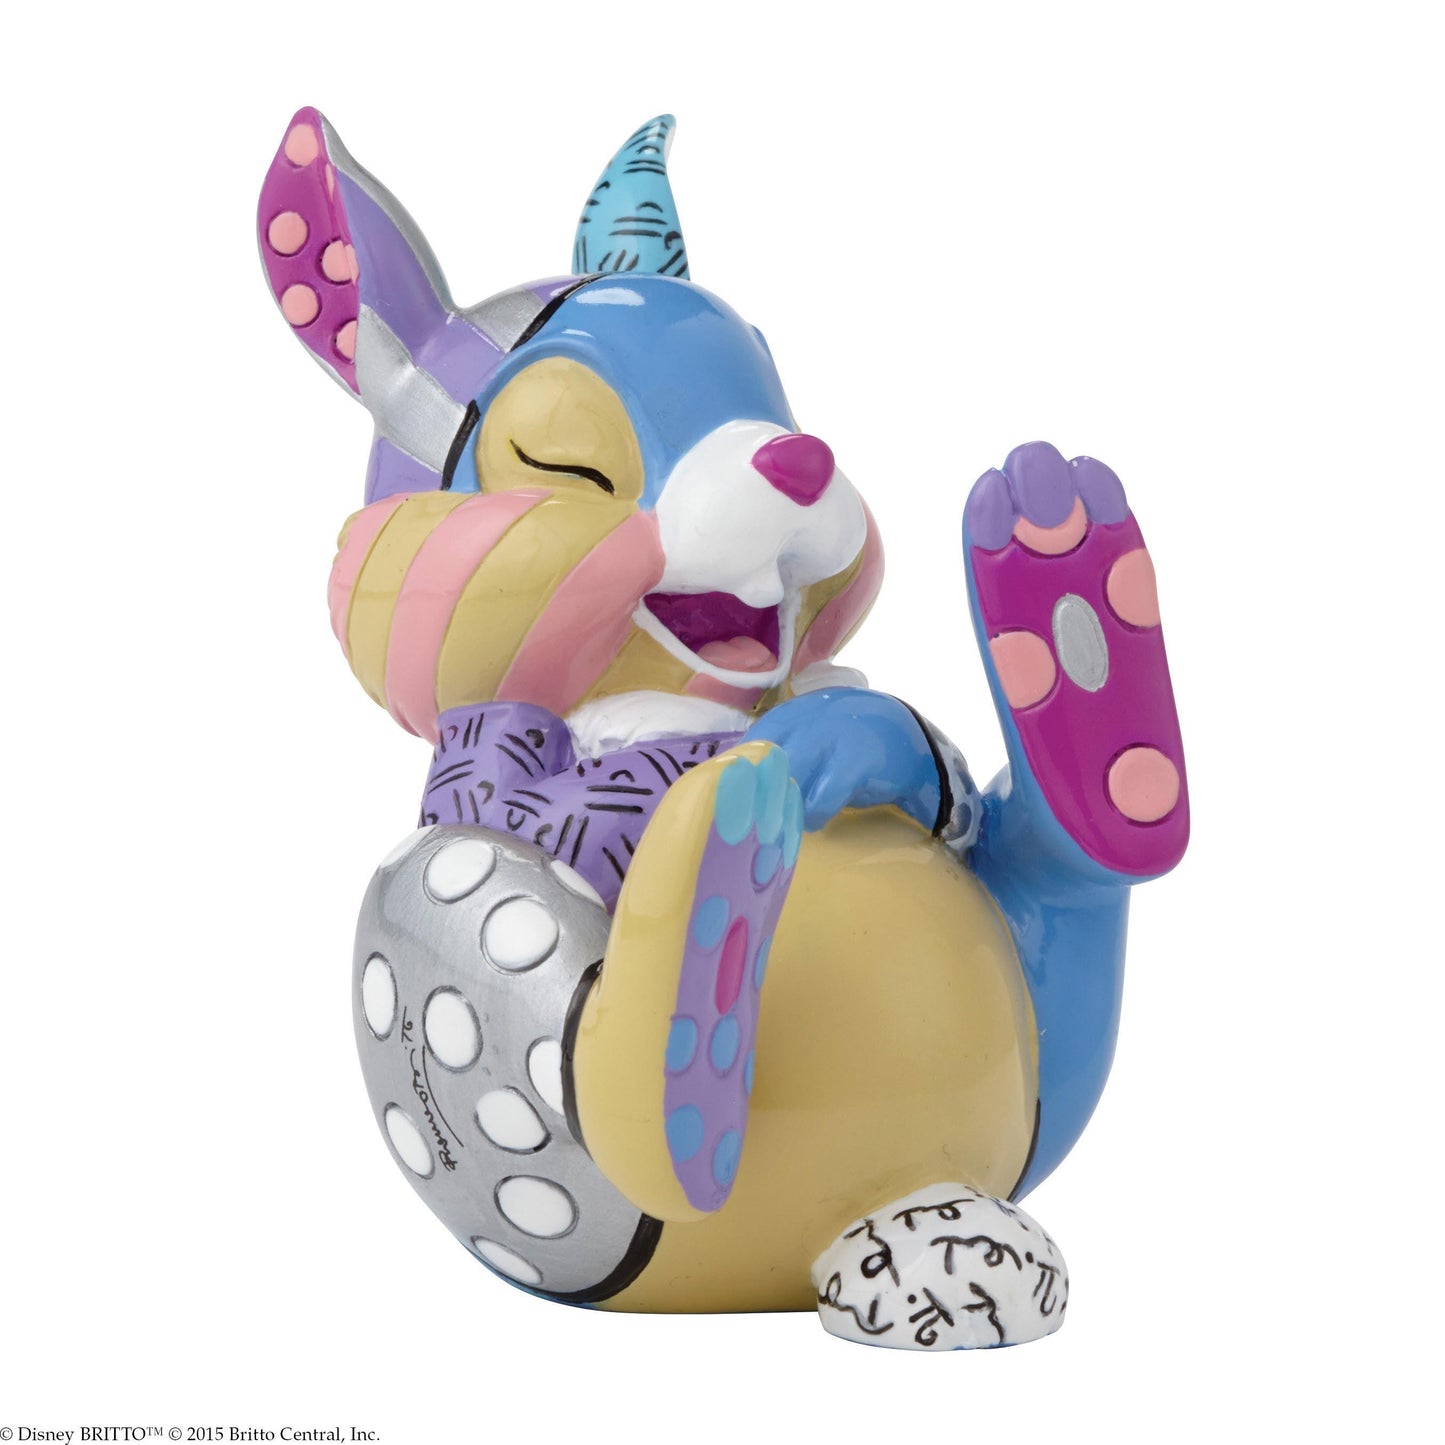 Thumper Mini Figurine (Disney Britto Collection) - Gallery Gifts Online 